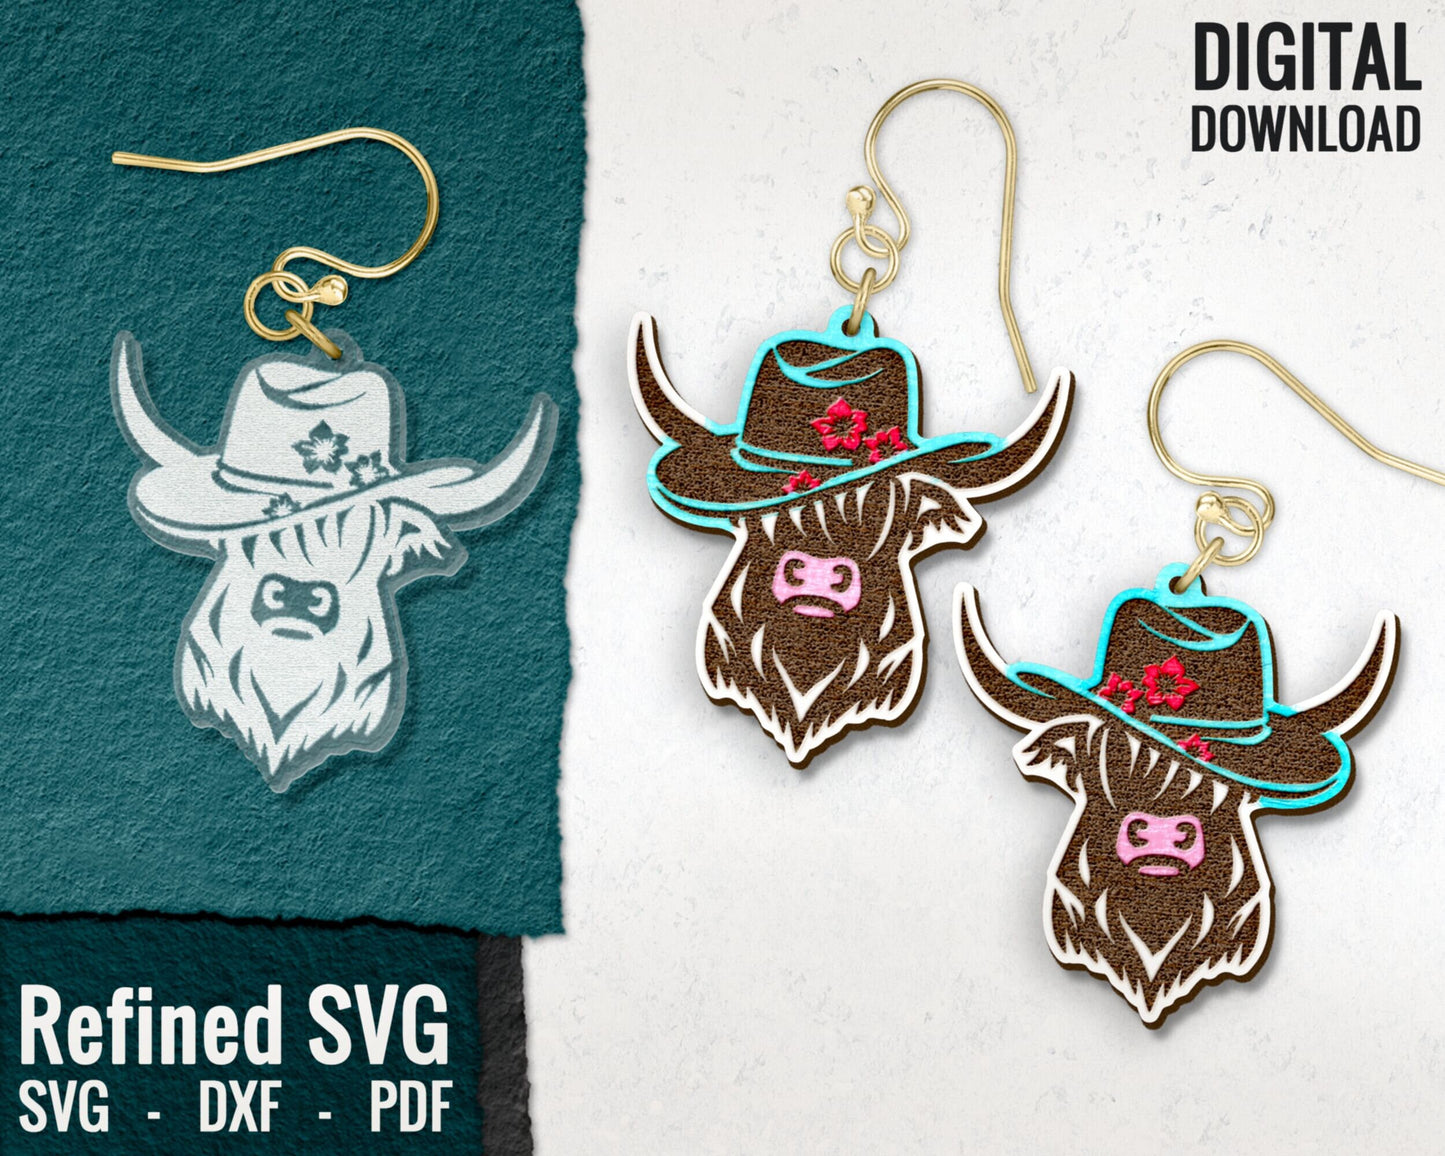 Highland Cow Earrings SVG Bundle, 4 Pairs of Highland Cow Earring Files, Cow Laser Earring Set, Cow Earring SVG Bundle,Cow Earring Cut Files